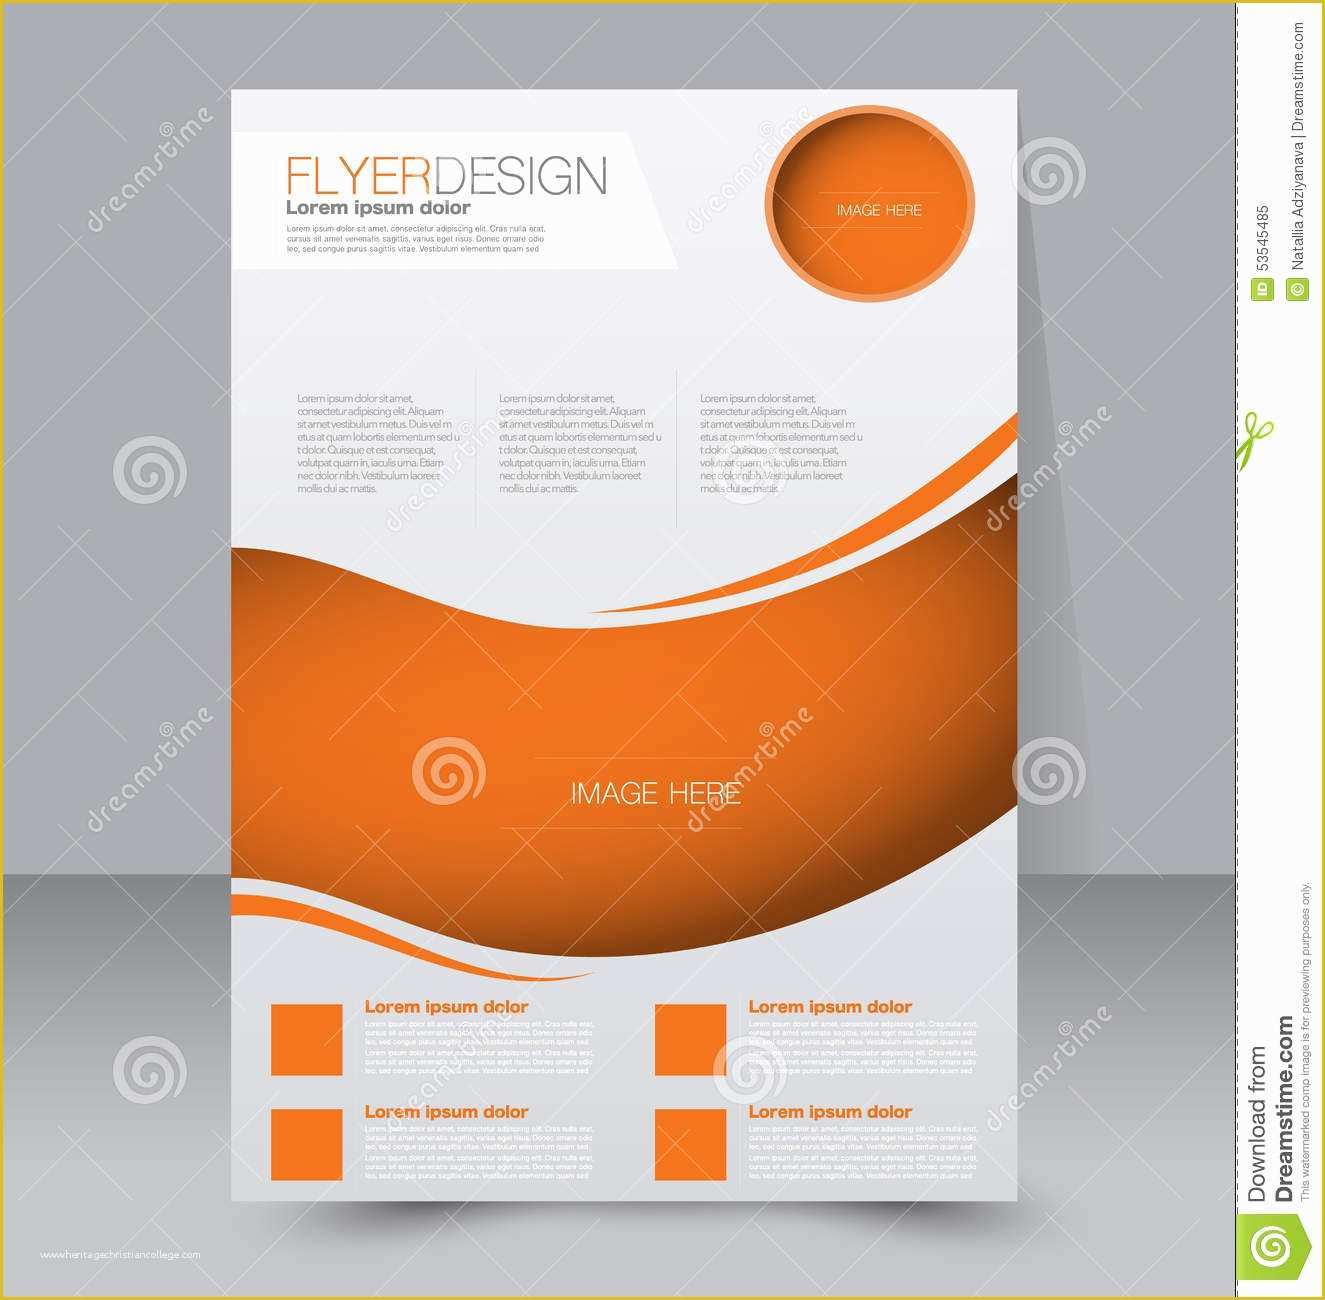 Free Editable Flyer Templates Of Flyer Template Business Brochure Editable A4 Poster